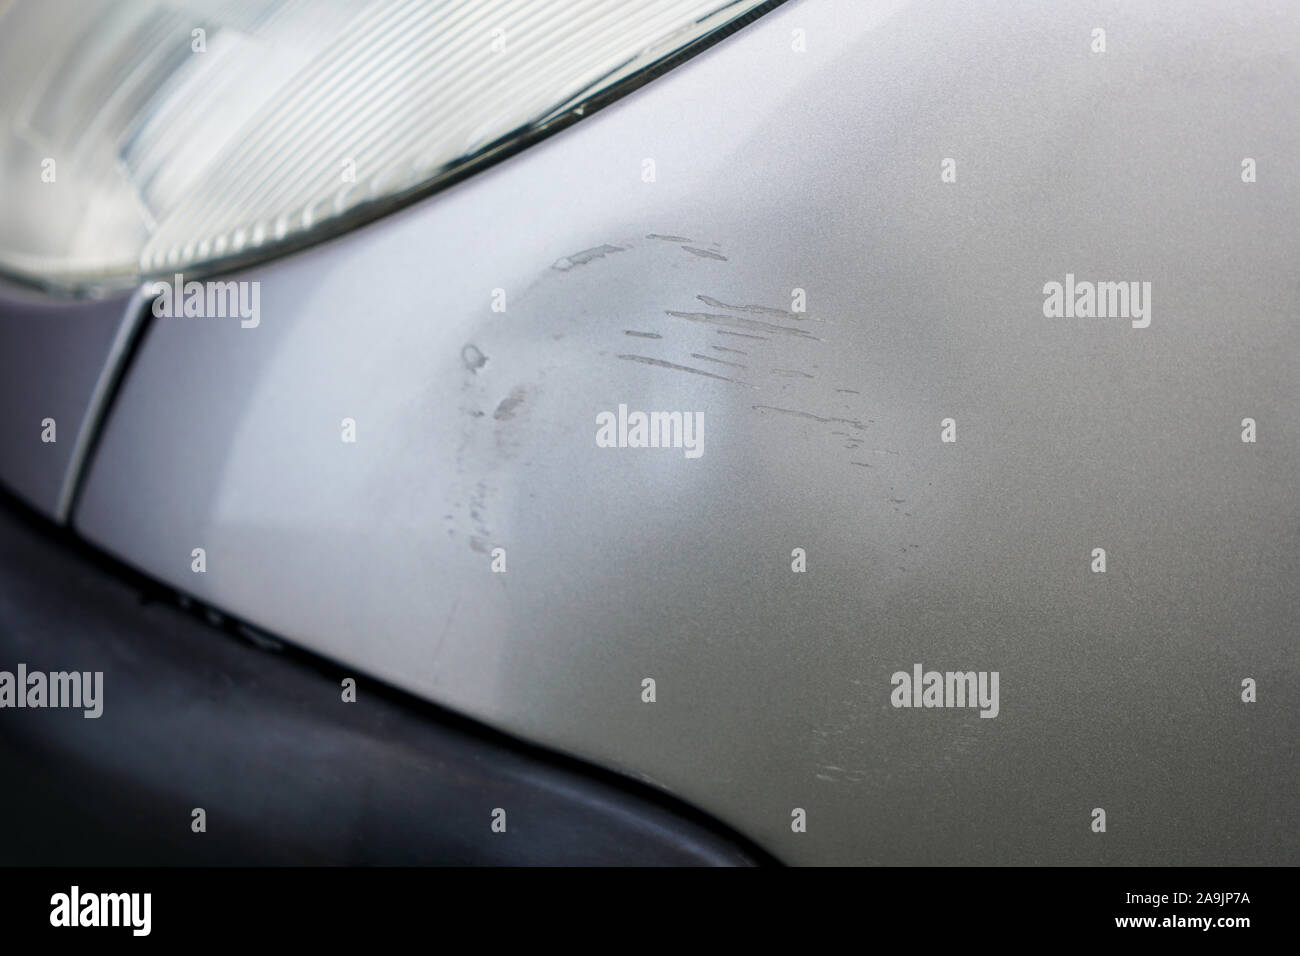 Macro of fender bender on silver gray car with scratches. Car with damage from crash accident, parking lot or traffic. Stock Photo